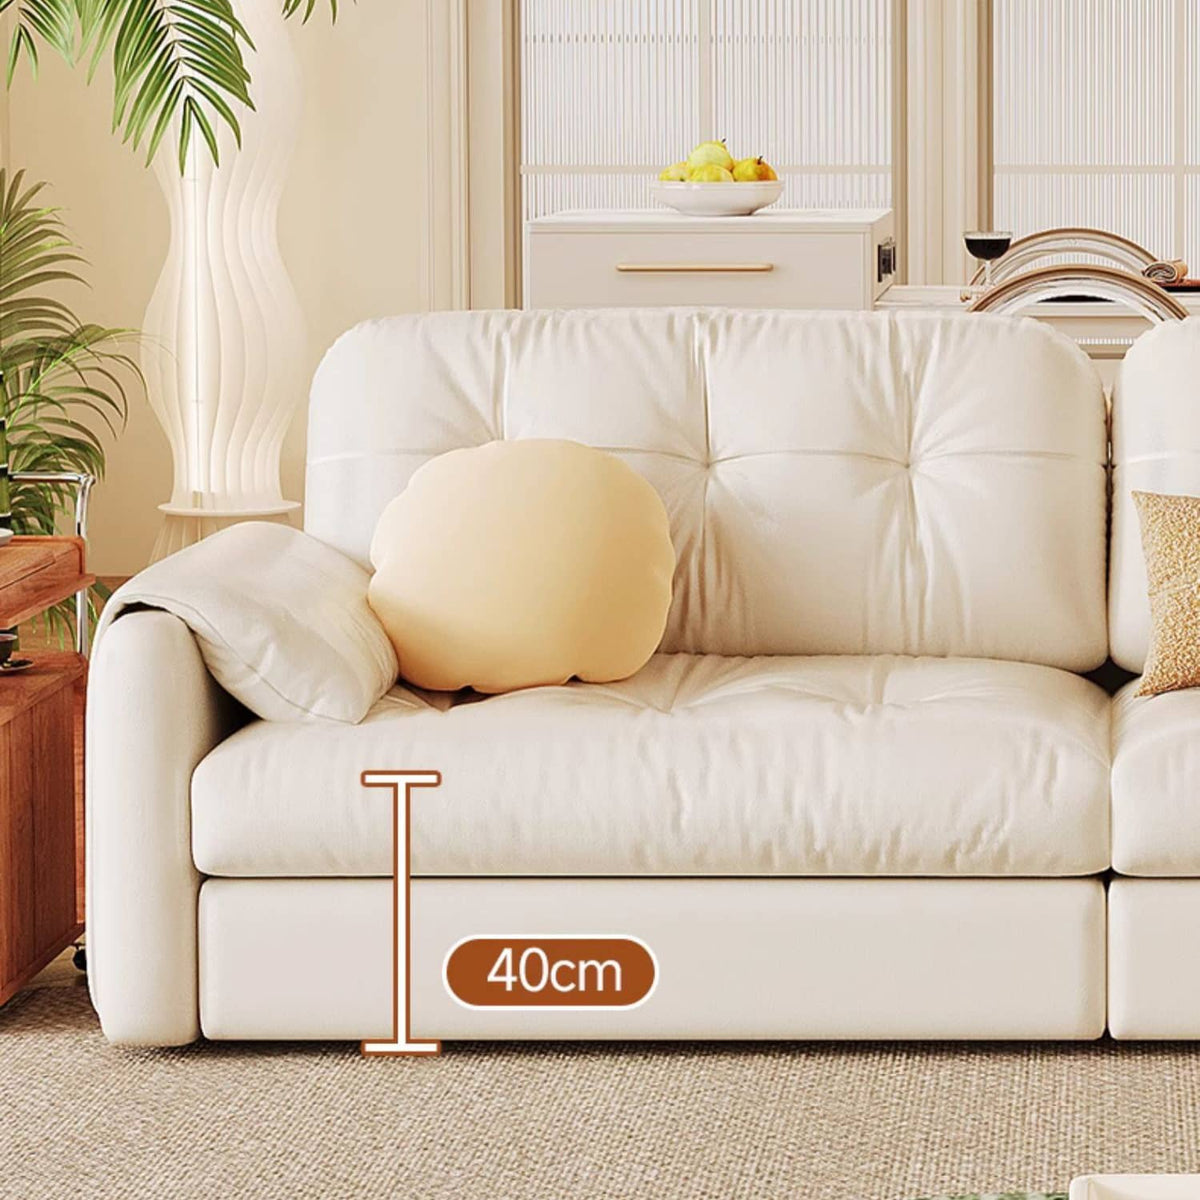 Elegant Light Brown Sofa with Beige and Ash Wood Accents and Stainless Steel Figure - Cotton and Faux Leather Upholstery fbby-1378